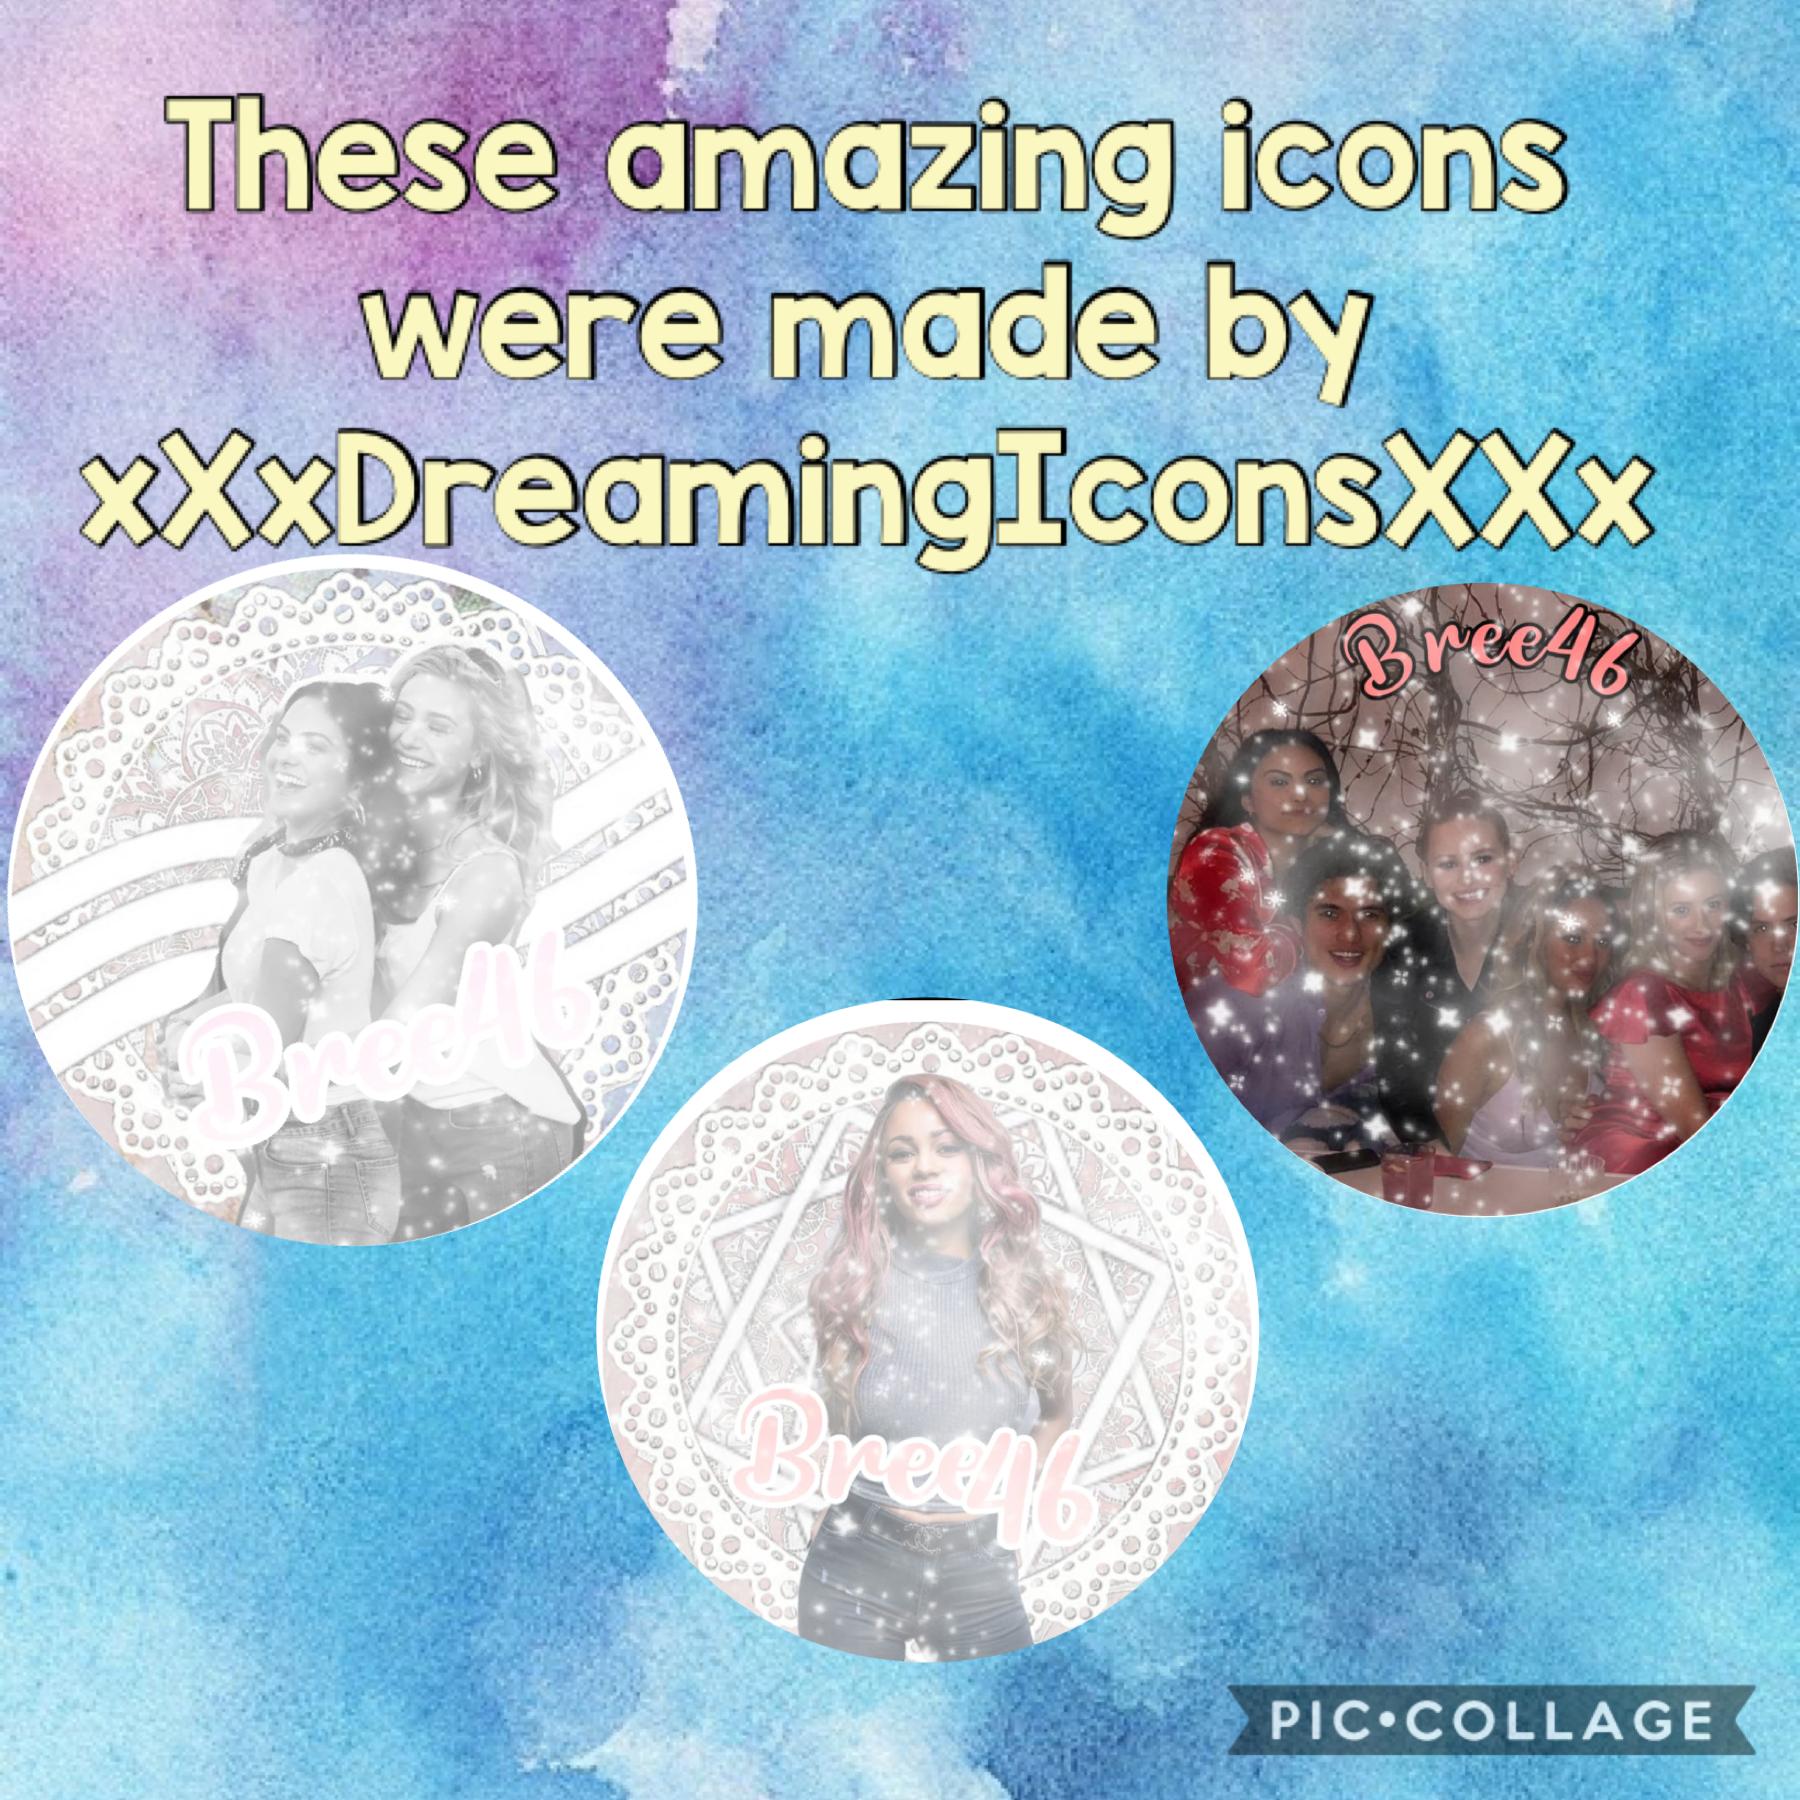 These amazing icons were made by xXxDreamingIconsXXx 